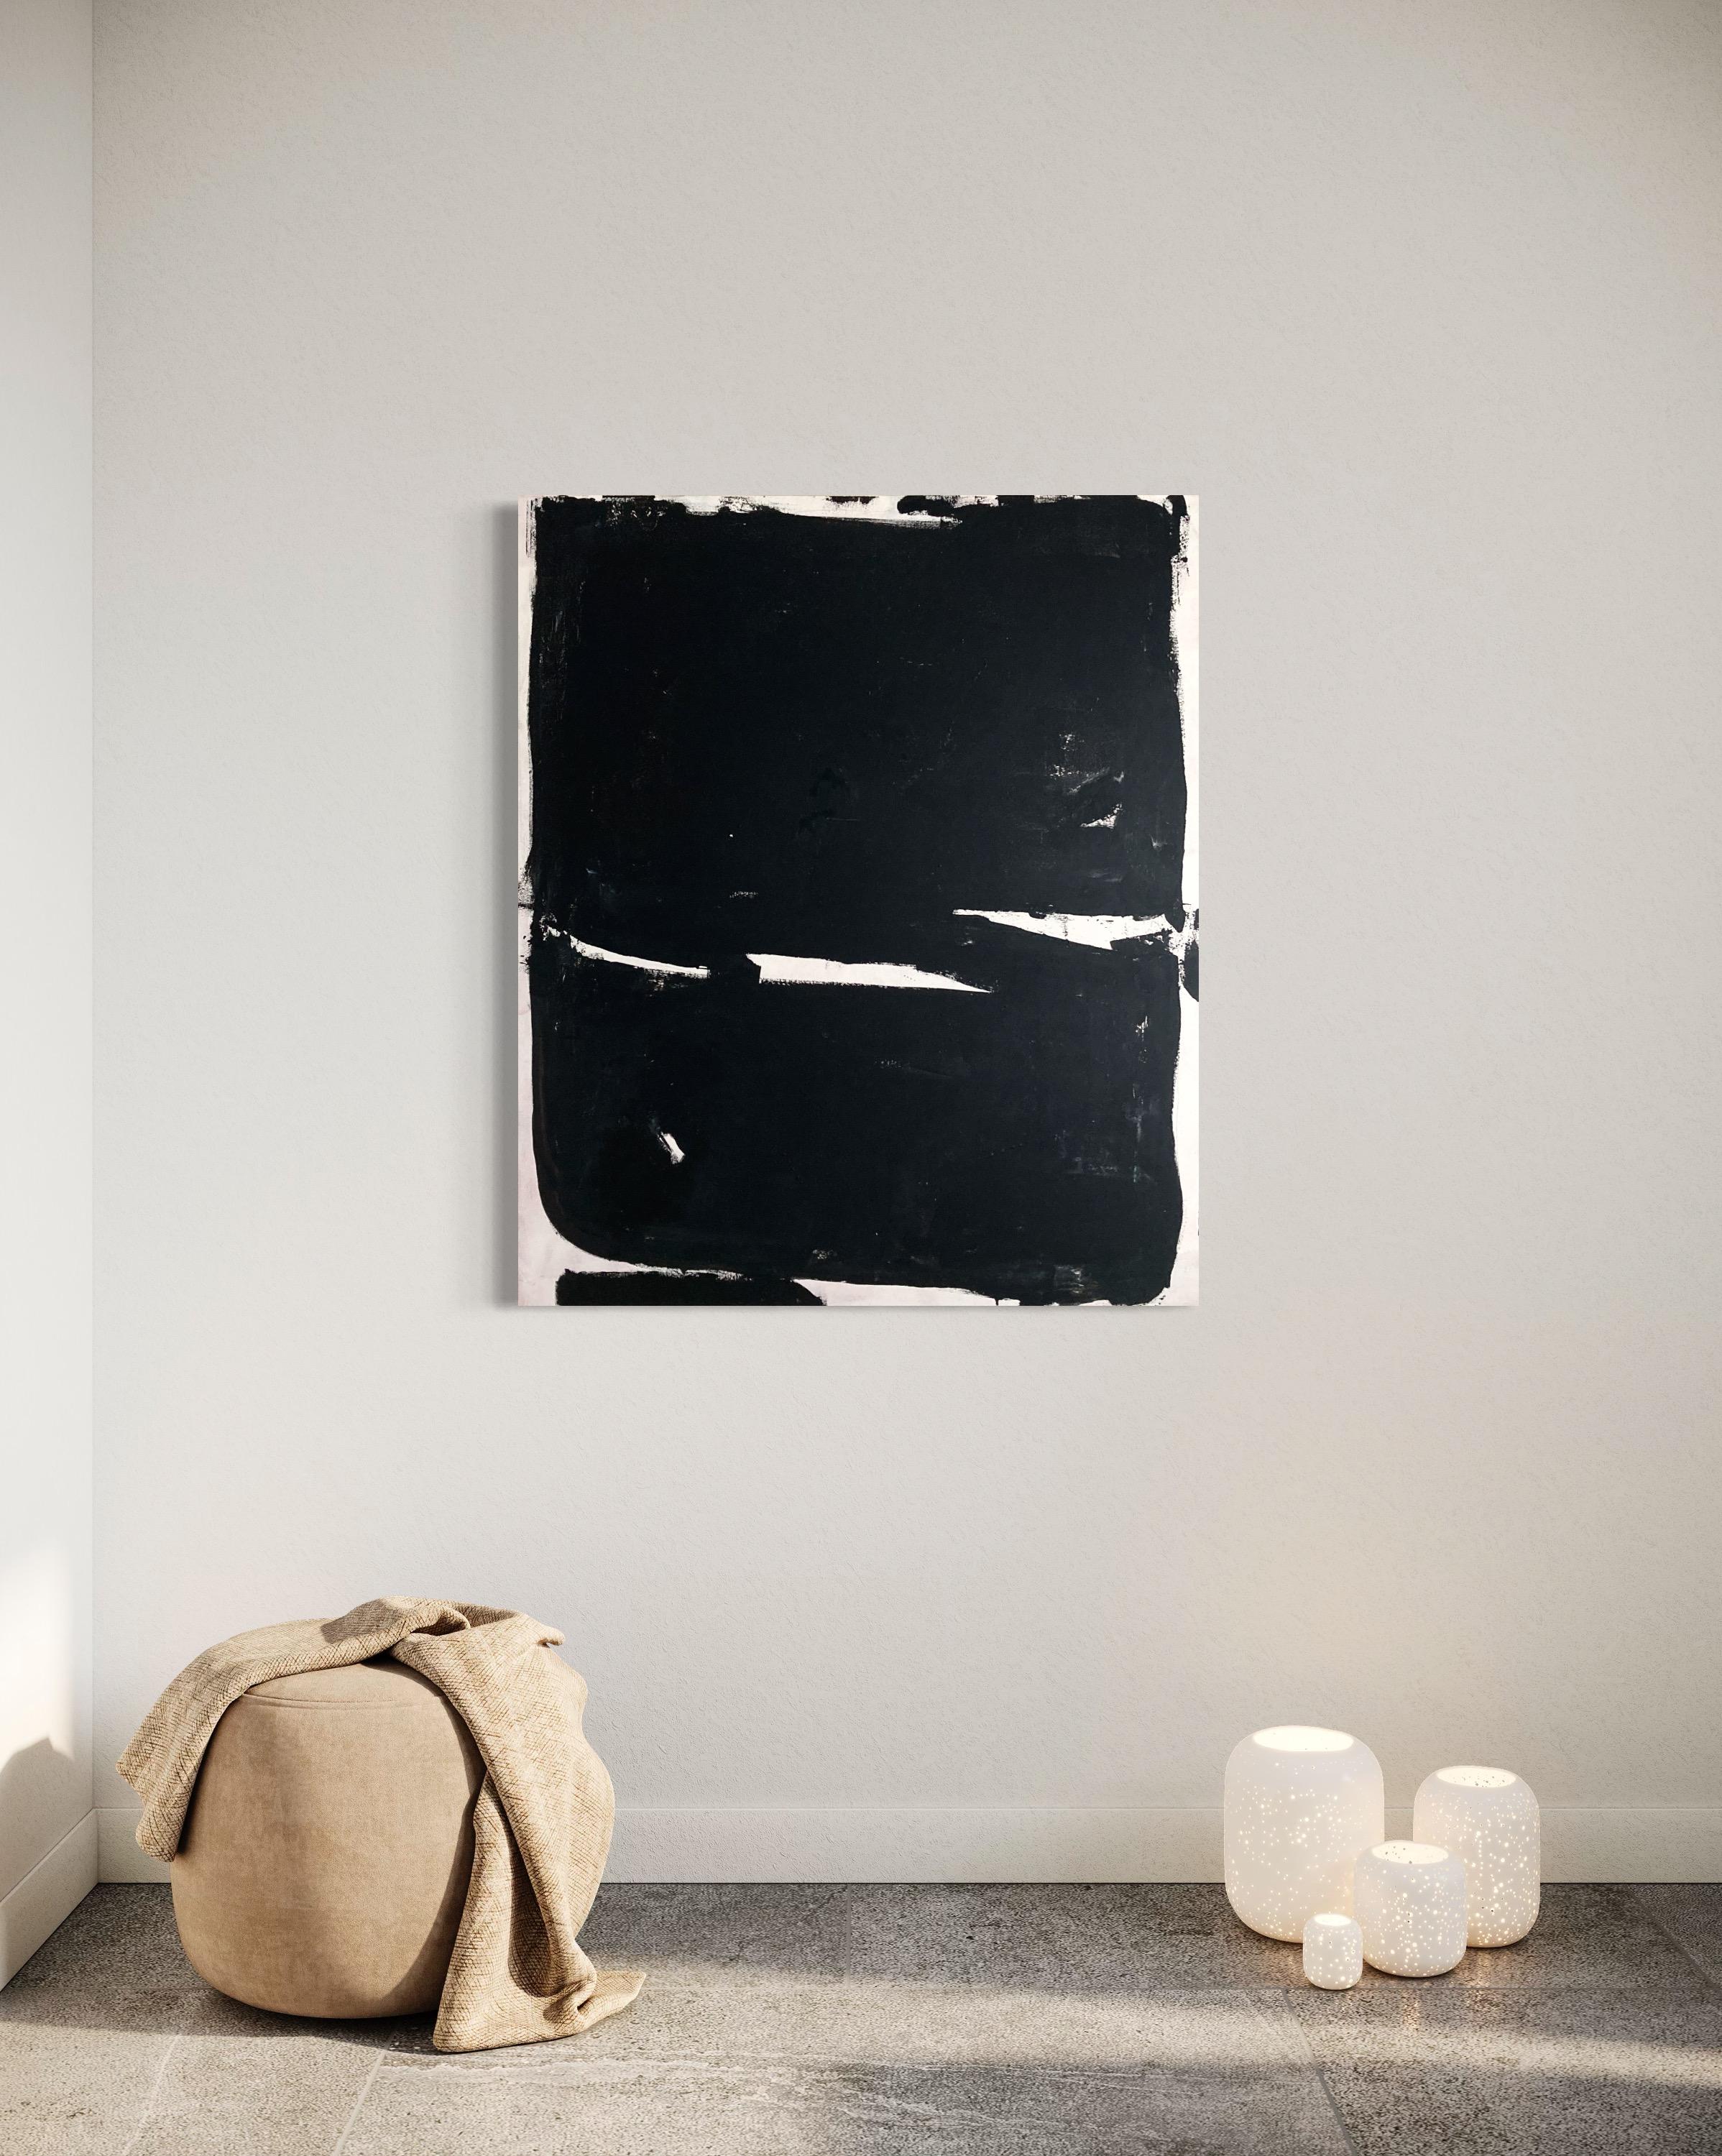 Triumph is an original contemporary acrylic on canvas painting that uses a restricted palette of black and white to create stark figure/ground contrast. Painted with sincere and focused energy the strength of the painting lies in its directness and